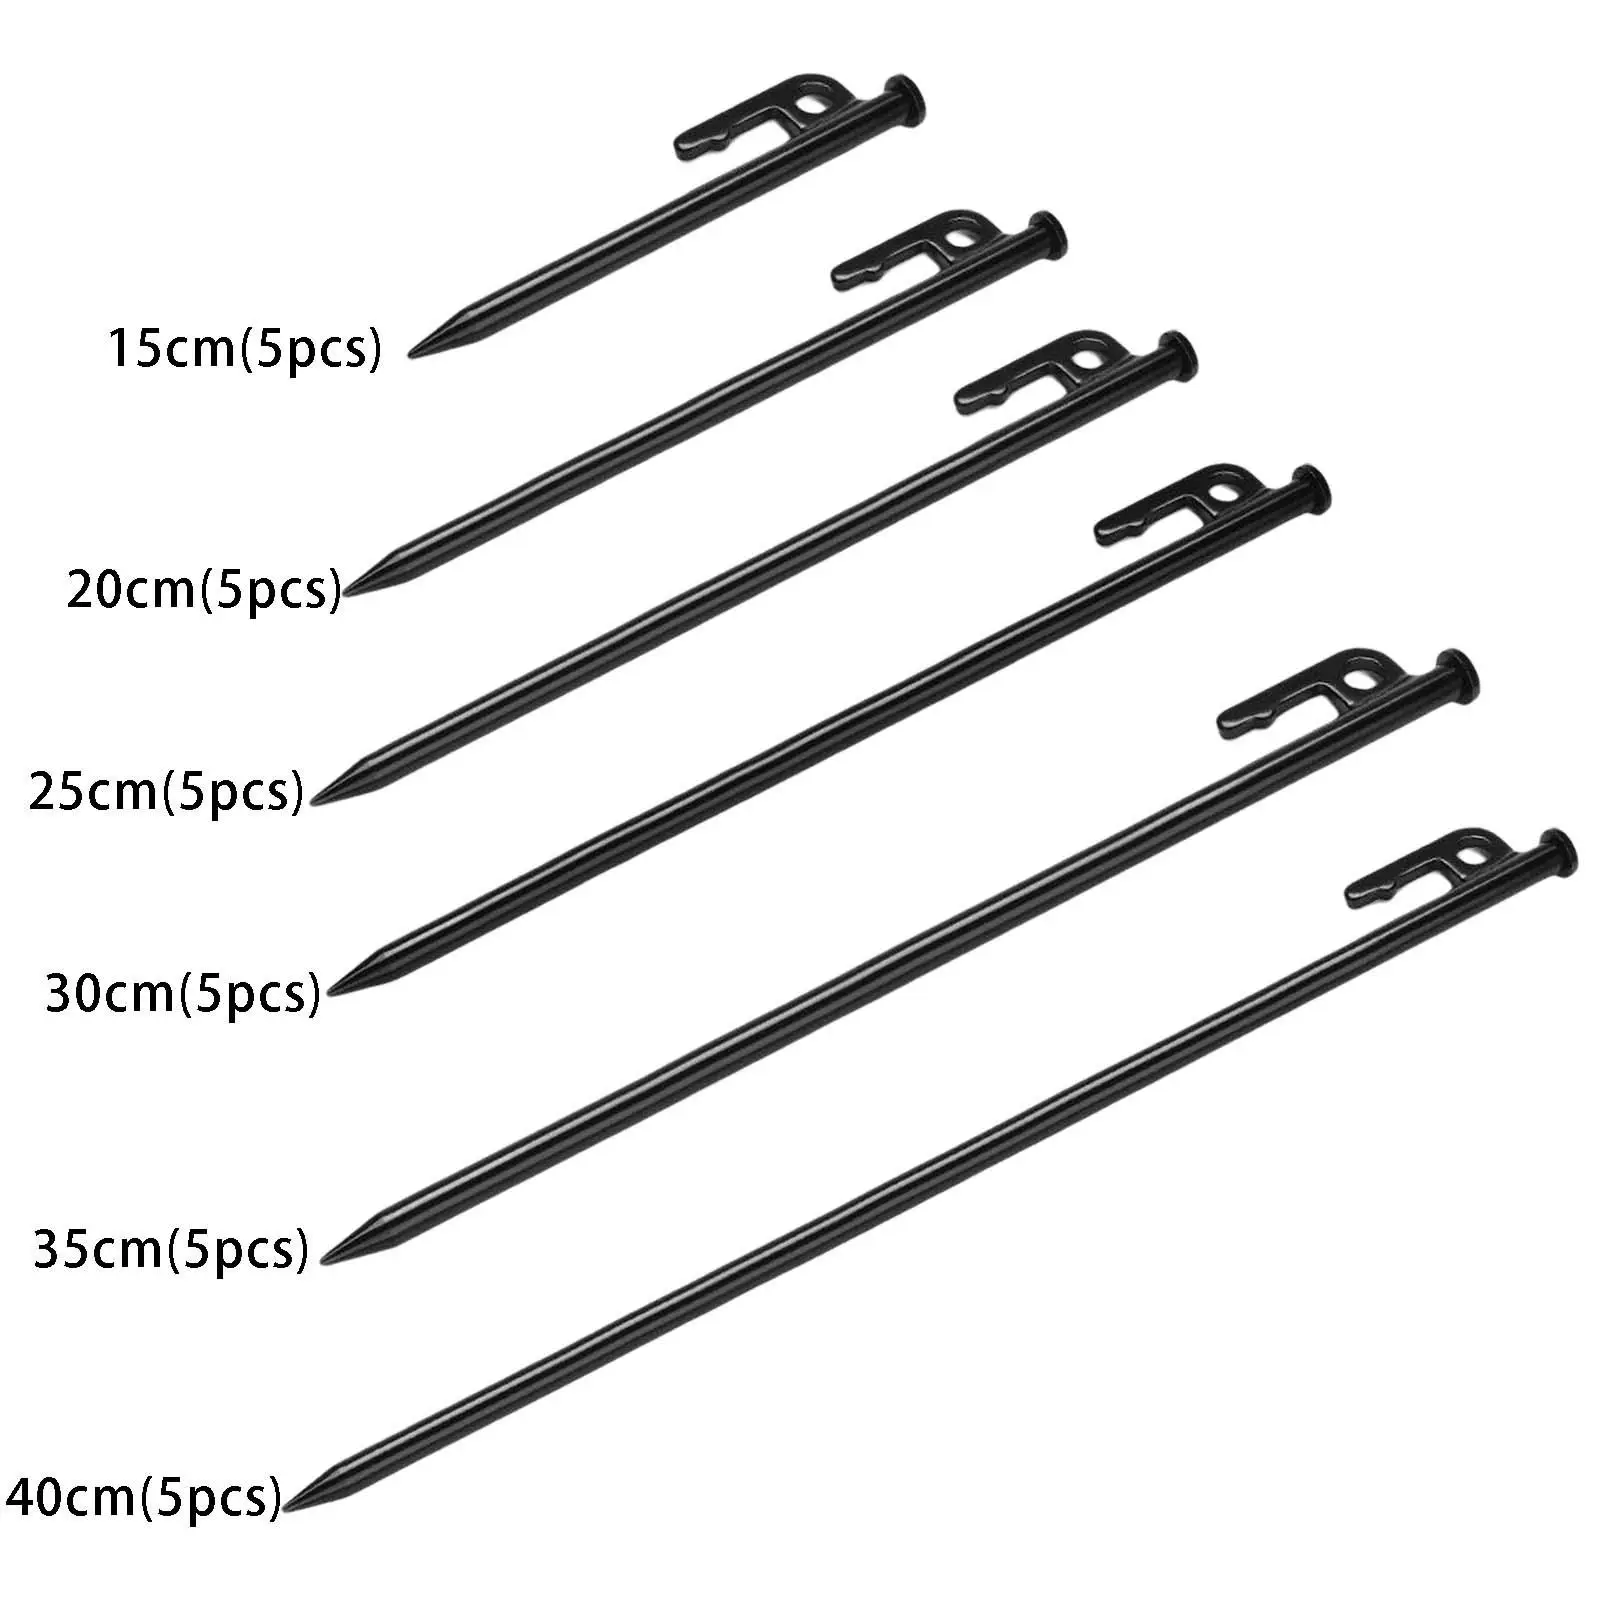 5Pcs Portable Camping Stakes Steel Nails Tent Accessories Unbreakable Tent Pegs for Gardening Outdoor Backpacking Picnic Canopy